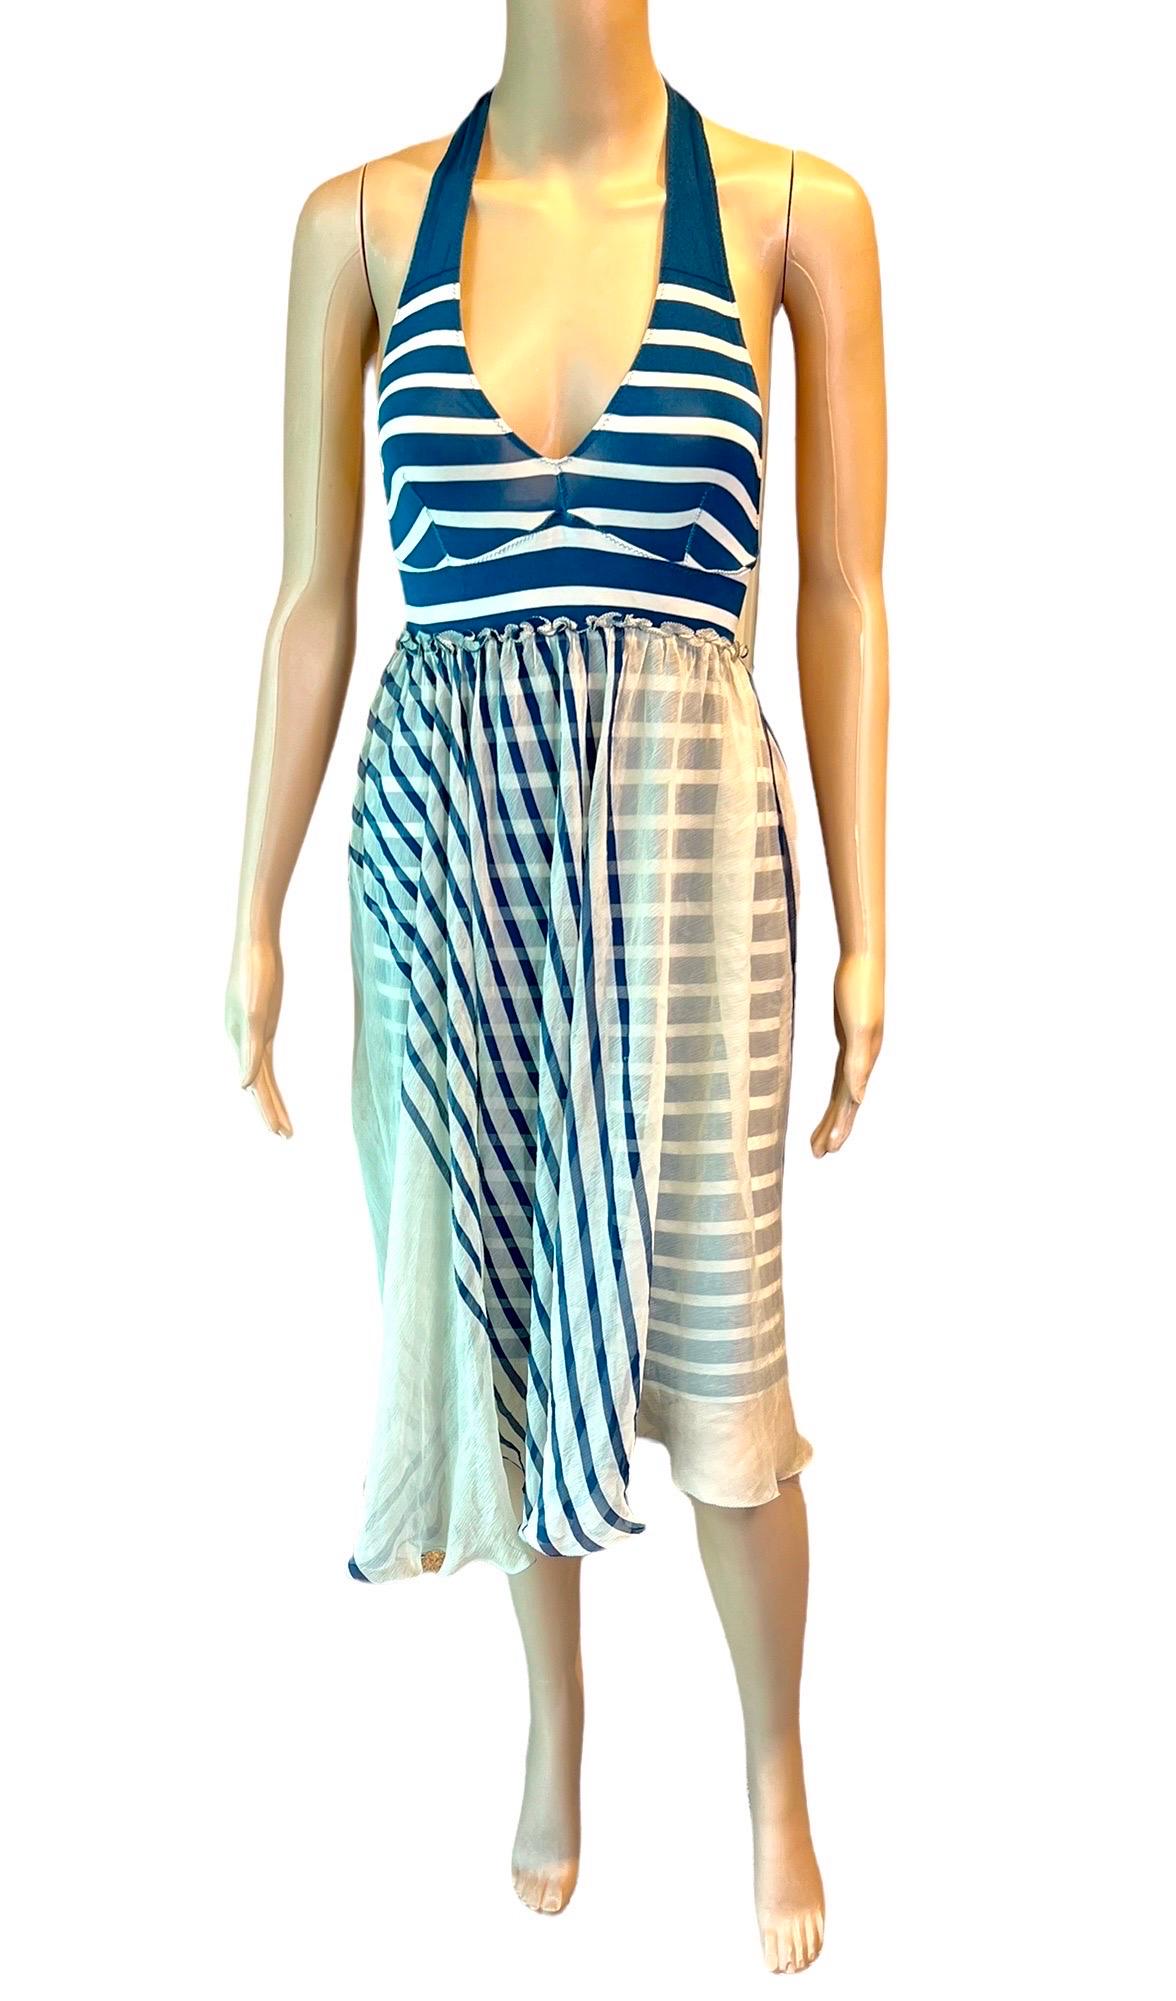 Jean Paul Gaultier Soleil S/S 2001 Striped Ivory & Navy Blue Cutout Back Dress  In Good Condition For Sale In Naples, FL